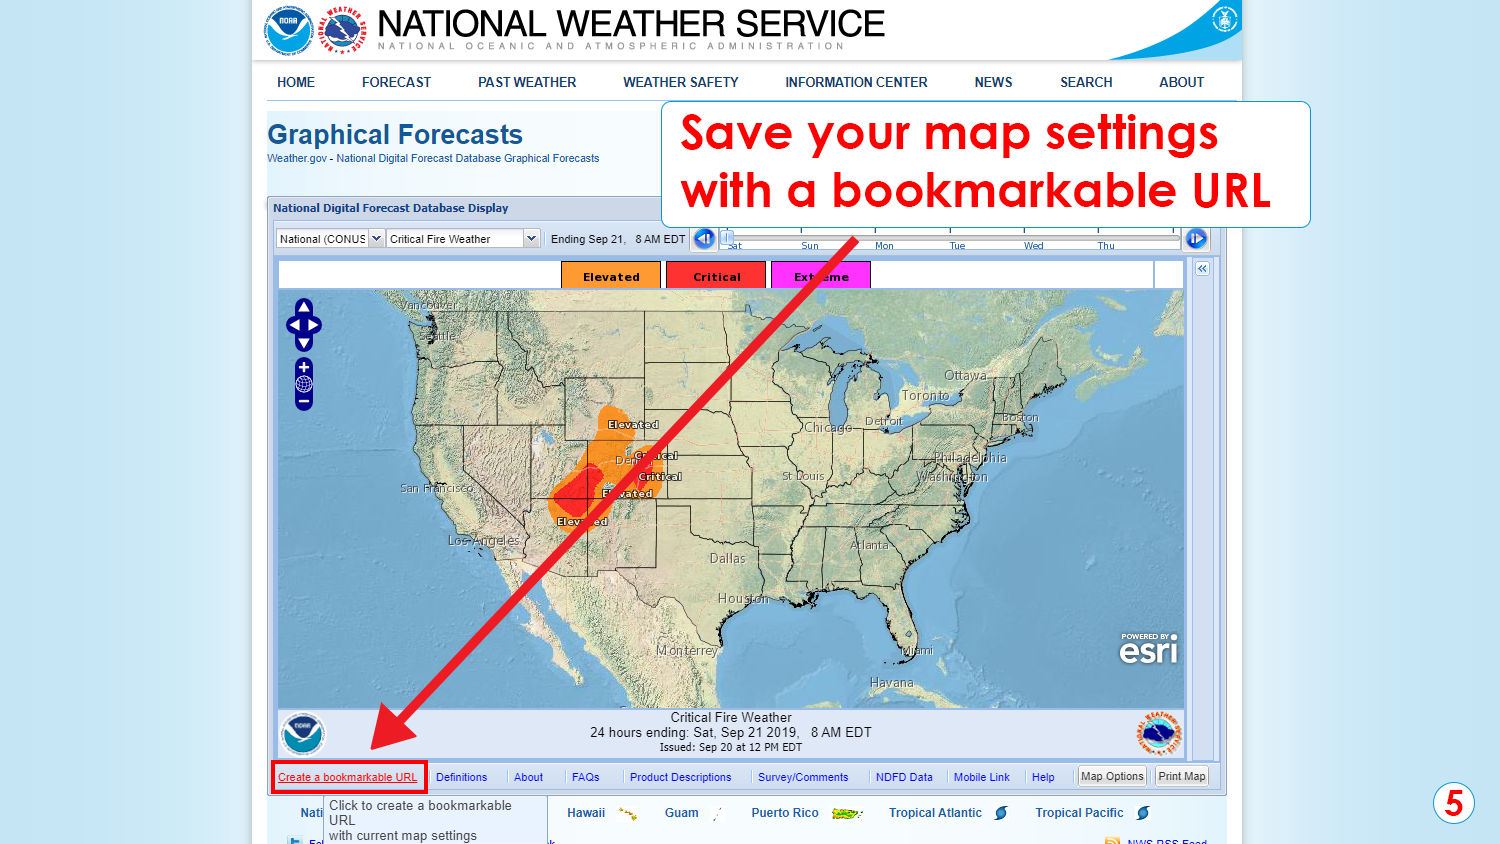 Step 5: Save your map settings with a bookmarkable URL. 